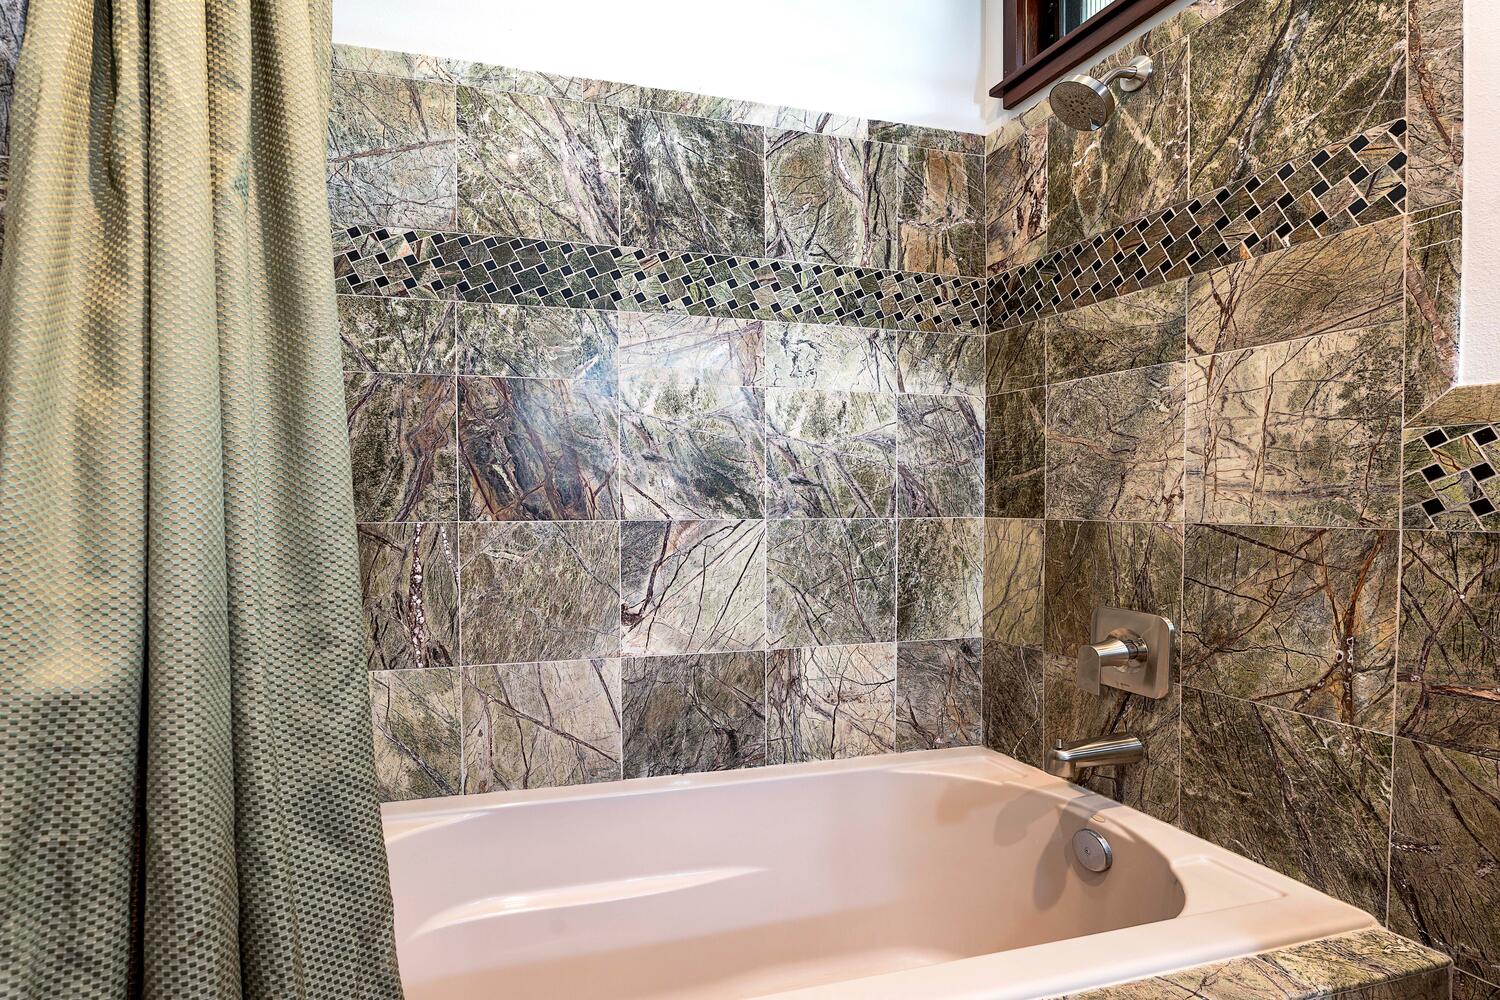 Kailua Kona Vacation Rentals, Island Oasis - Guest bedroom featuring tub/shower combo